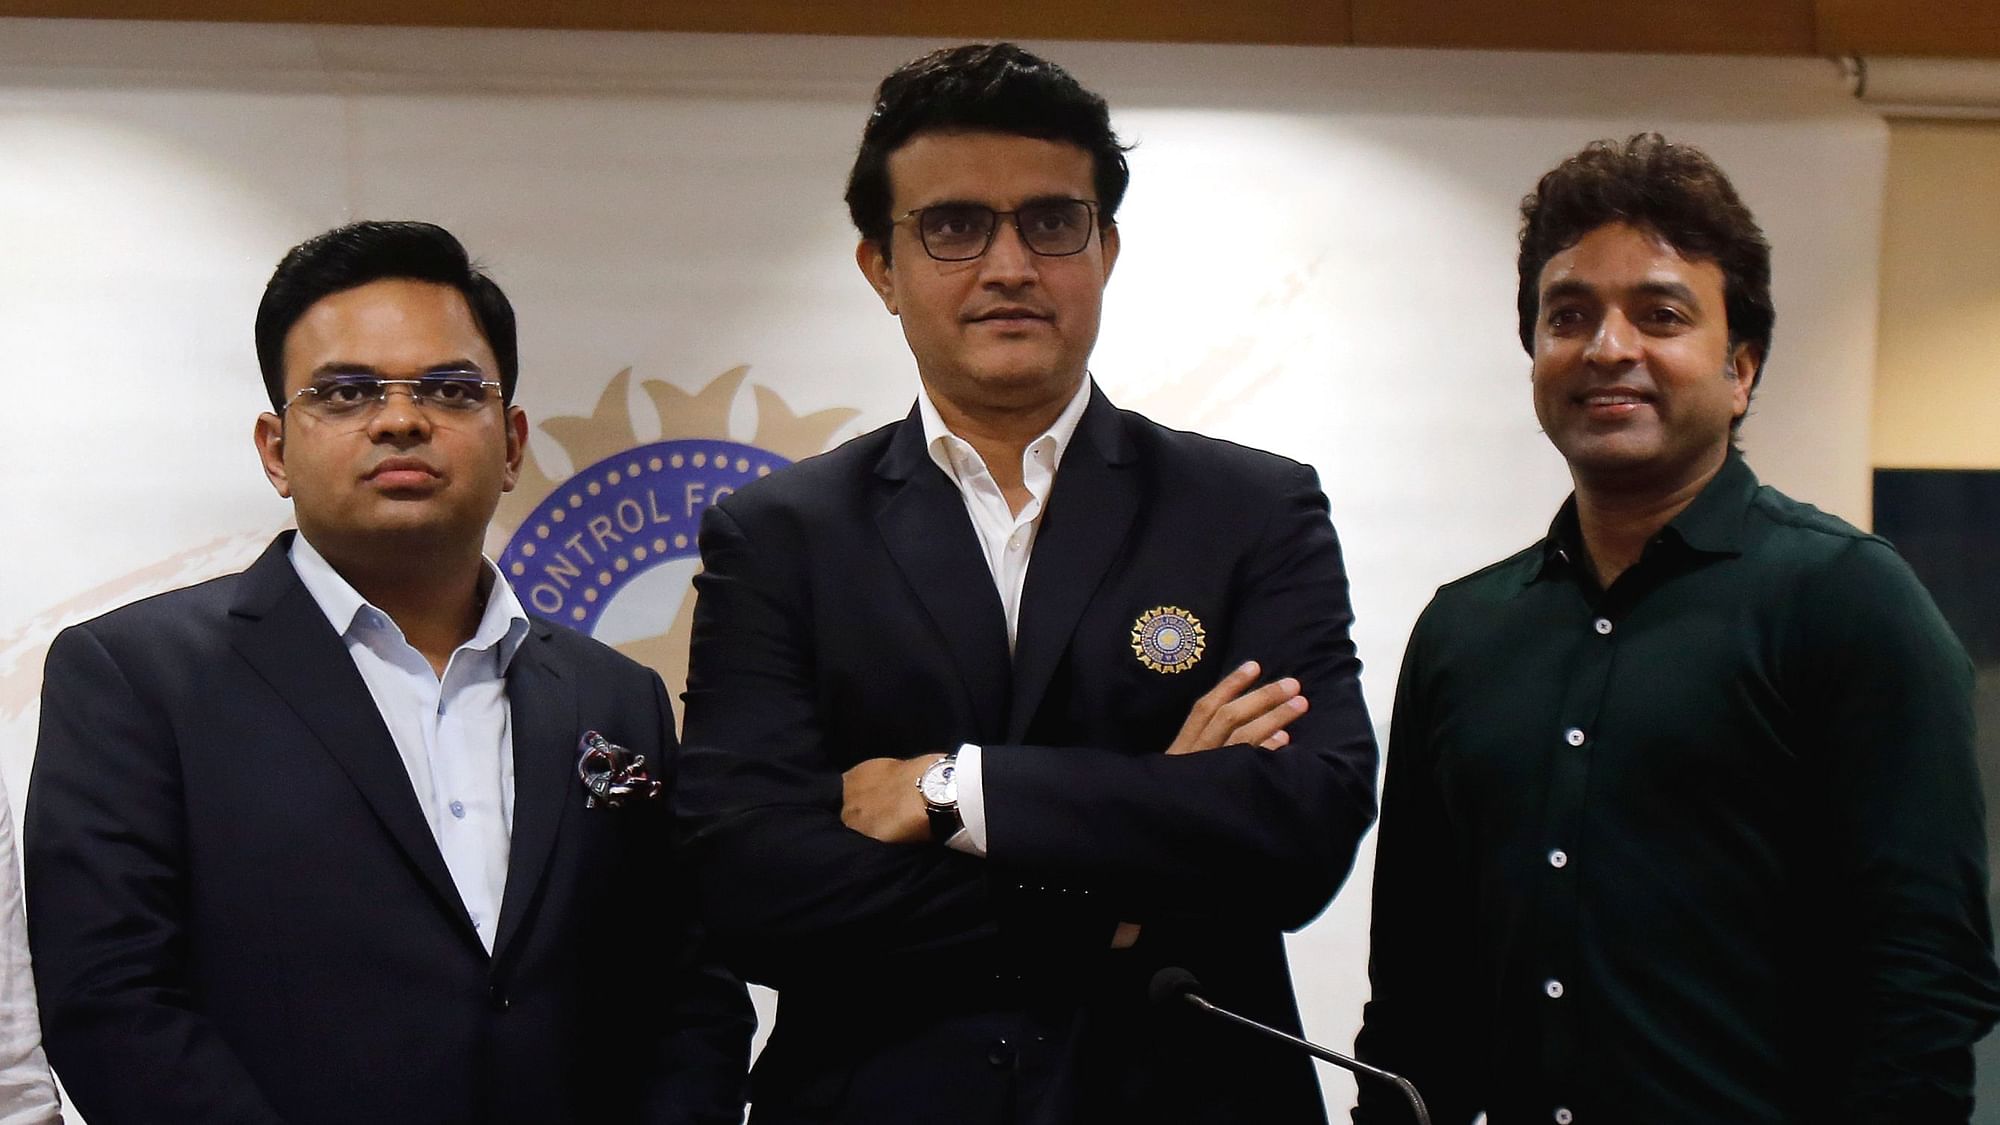 Newly-elected President of the Board of Control for Cricket in India (BCCI) Sourav Ganguly, center, Secretary Jay Shah, left, and Treasurer Arun Dhumal.